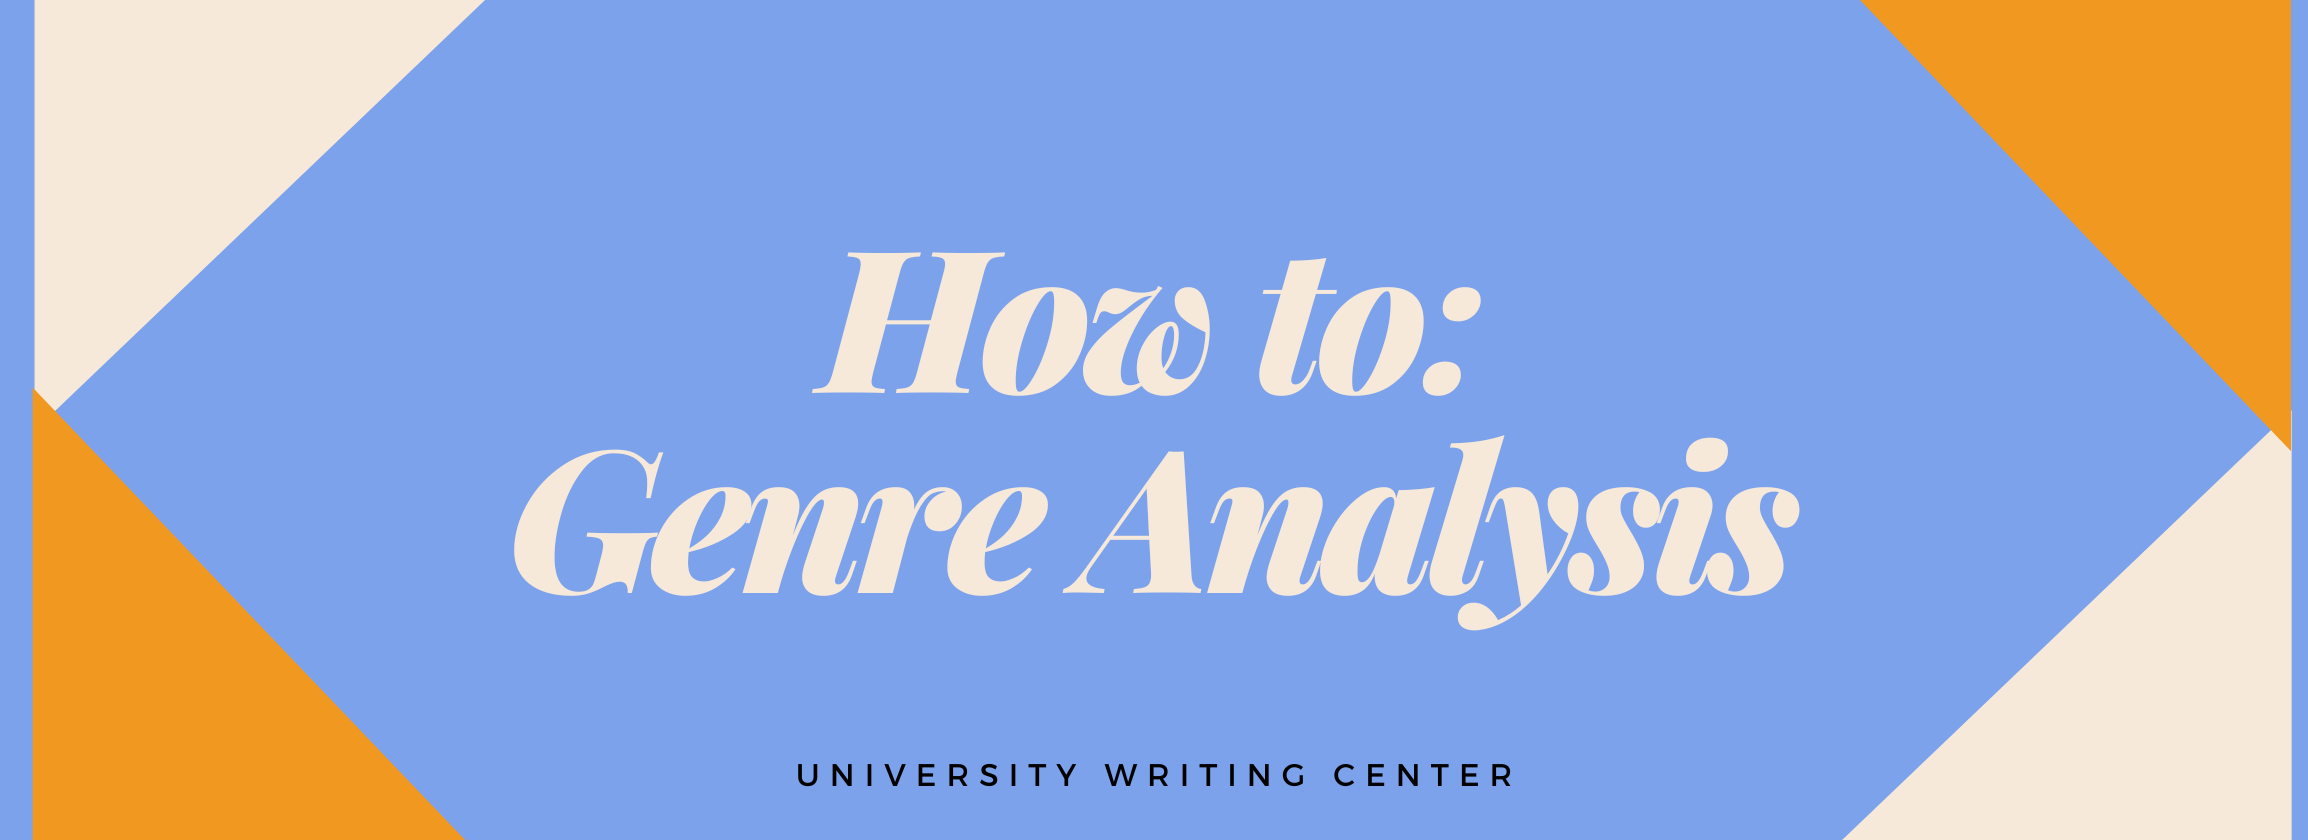 genre analysis assignments